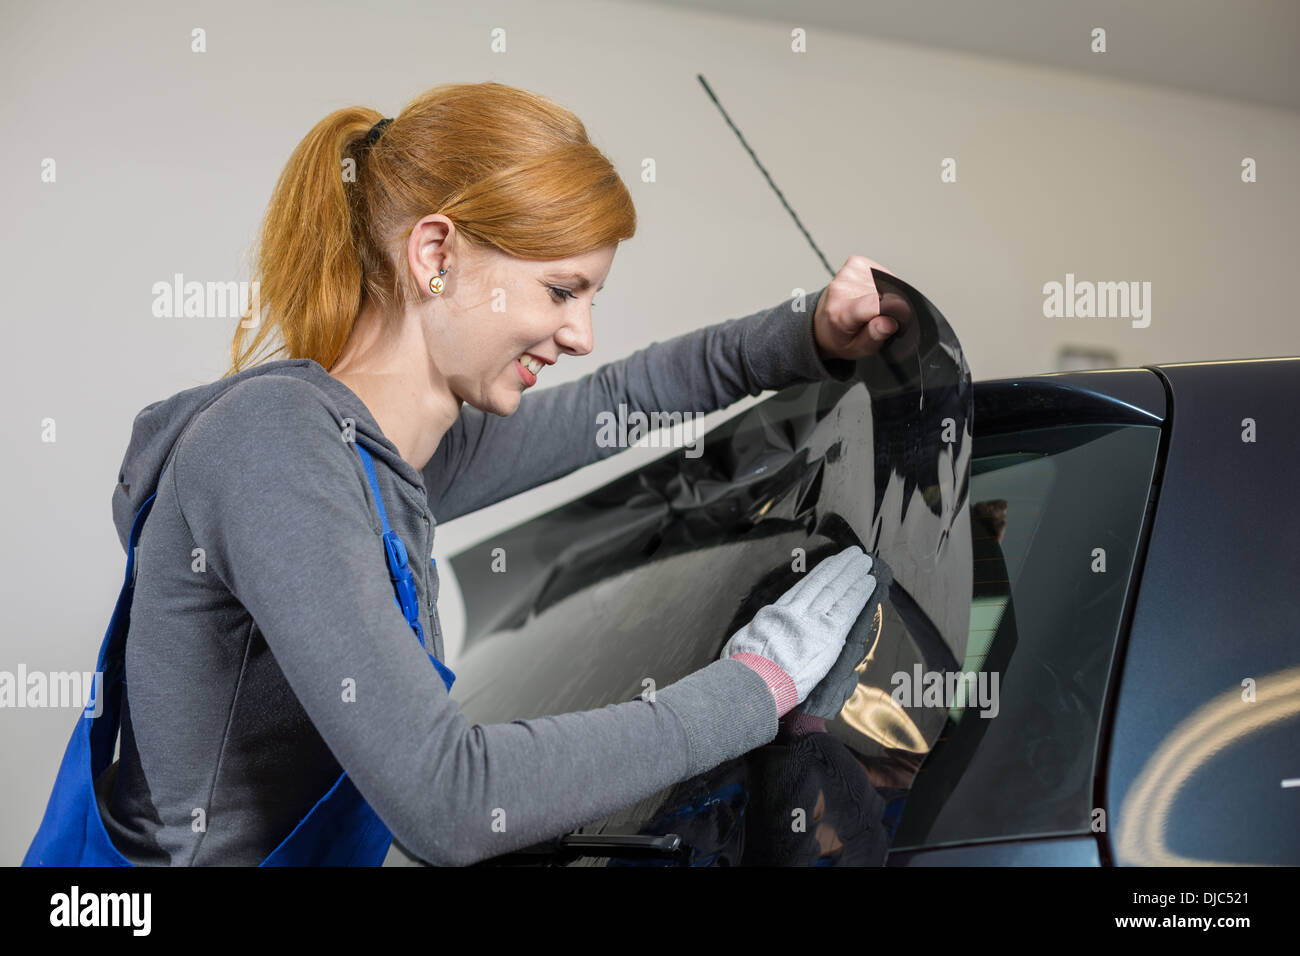 Car wrappers tinting a vehicle window with a tinted foil or film using heat gun and squeegee Stock Photo